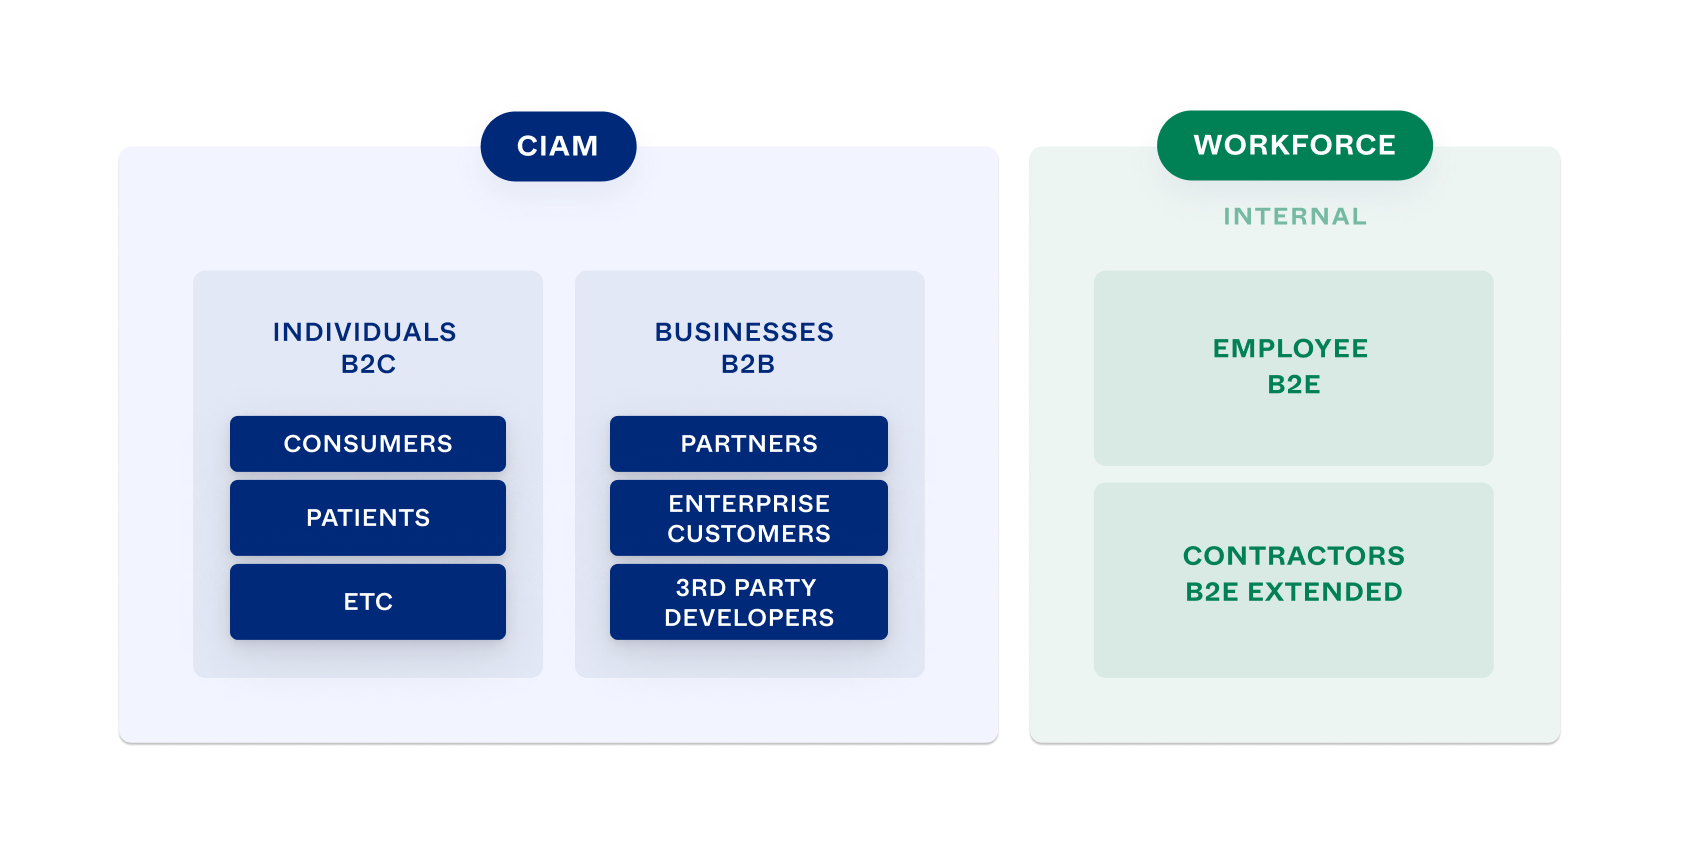 An illustration that gives examples of the roles of people that access customer versus workforce solutions.